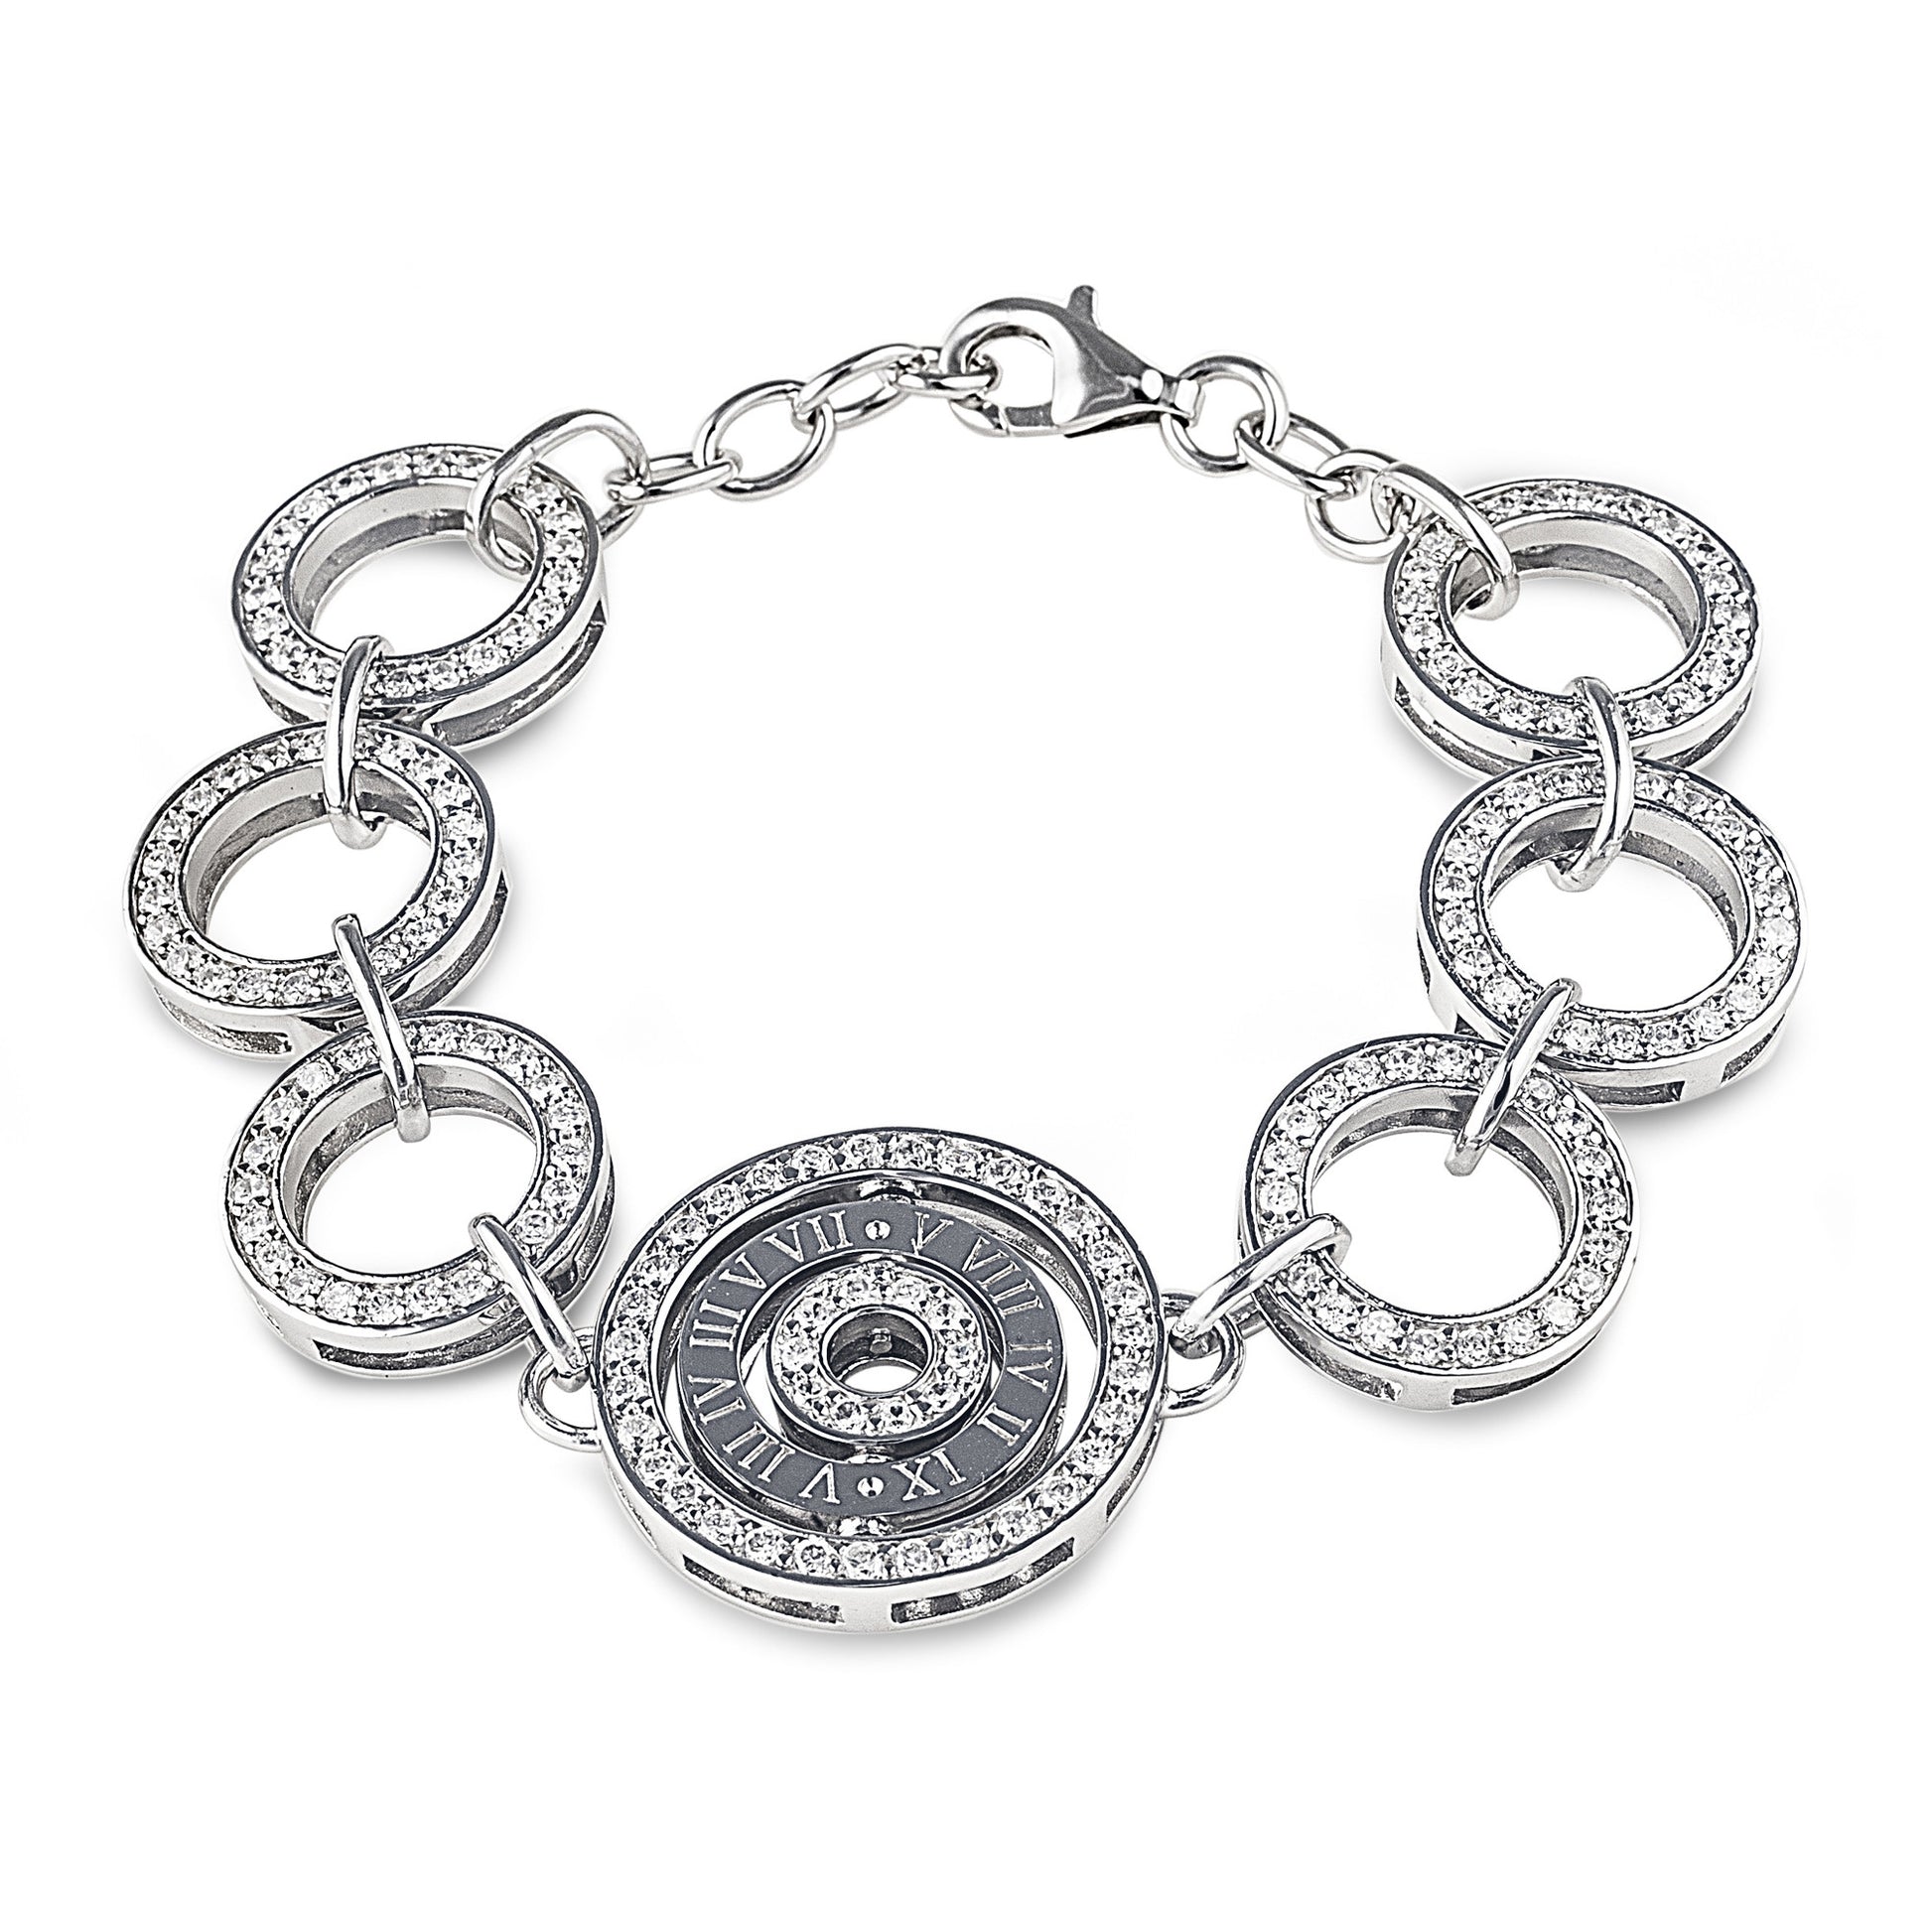 Juicy Bling Bracelet in 925 Sterling Silver with Cubic Zirconia Stones and Roman Numerals. Worldwide Shipping from Australia. Affordable luxury jewellery by Bellagio & Co.